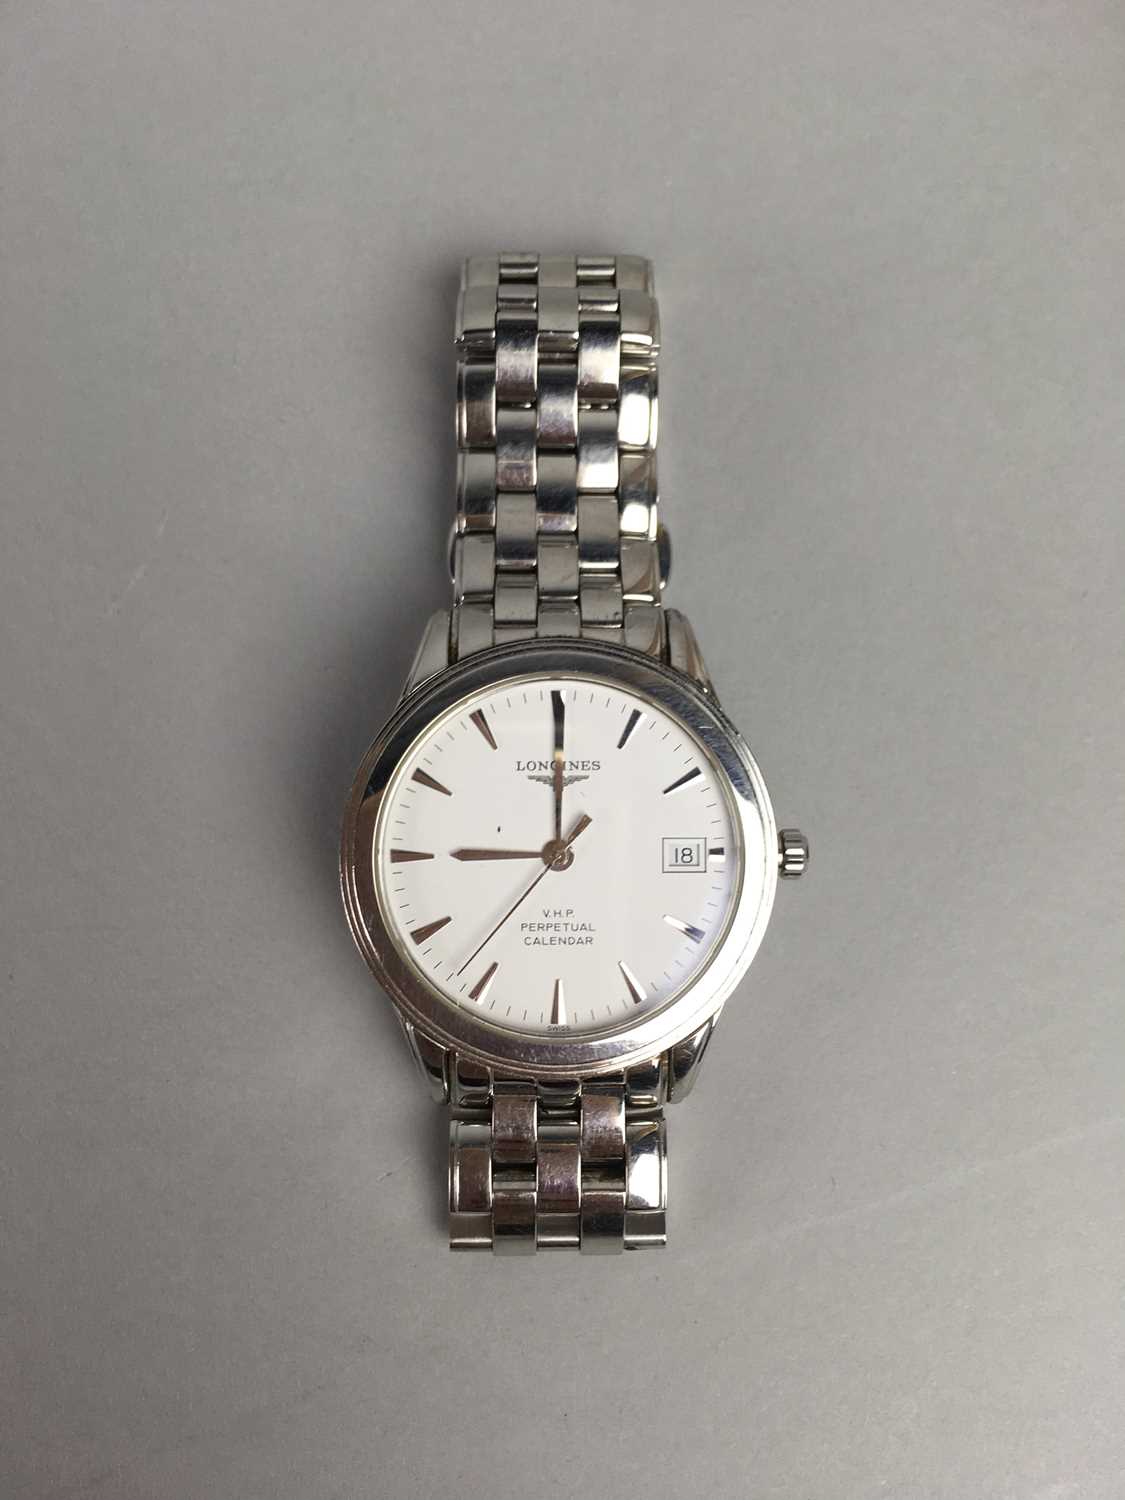 Lot 40 - A GENT'S LONGINES STAINLESS STEEL WRIST WATCH